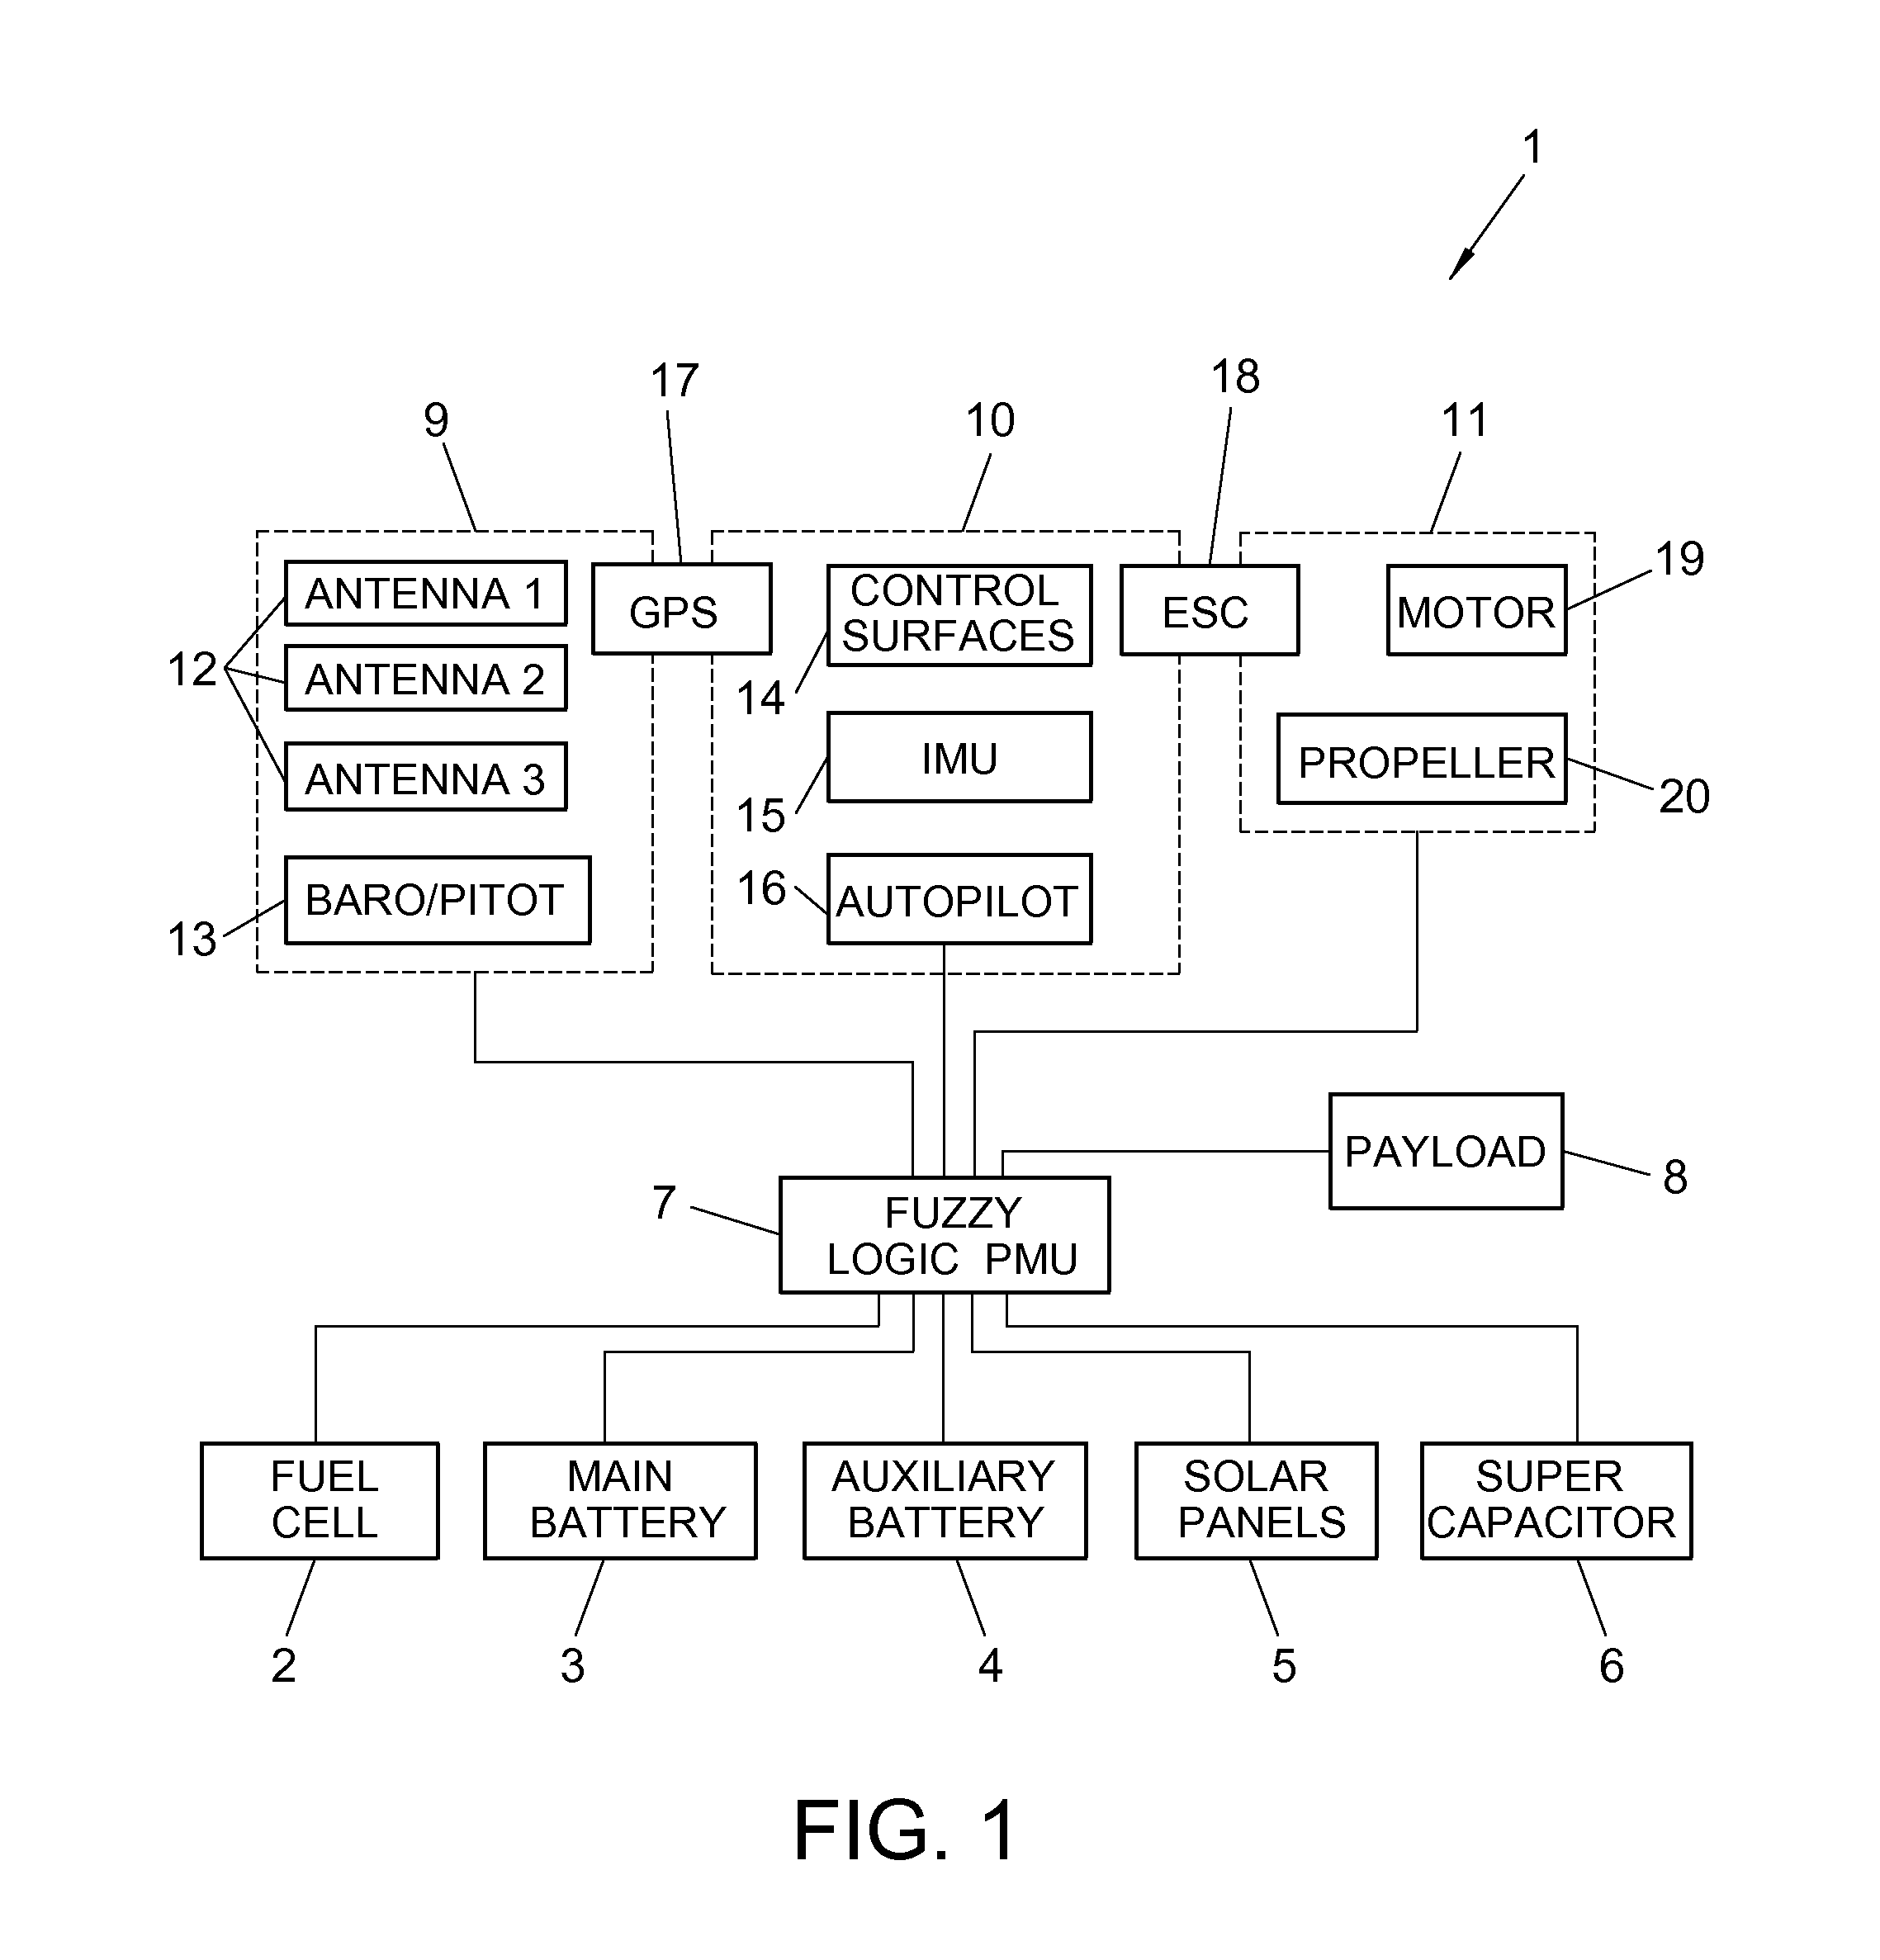 Power management method and system for an unmanned air vehicle